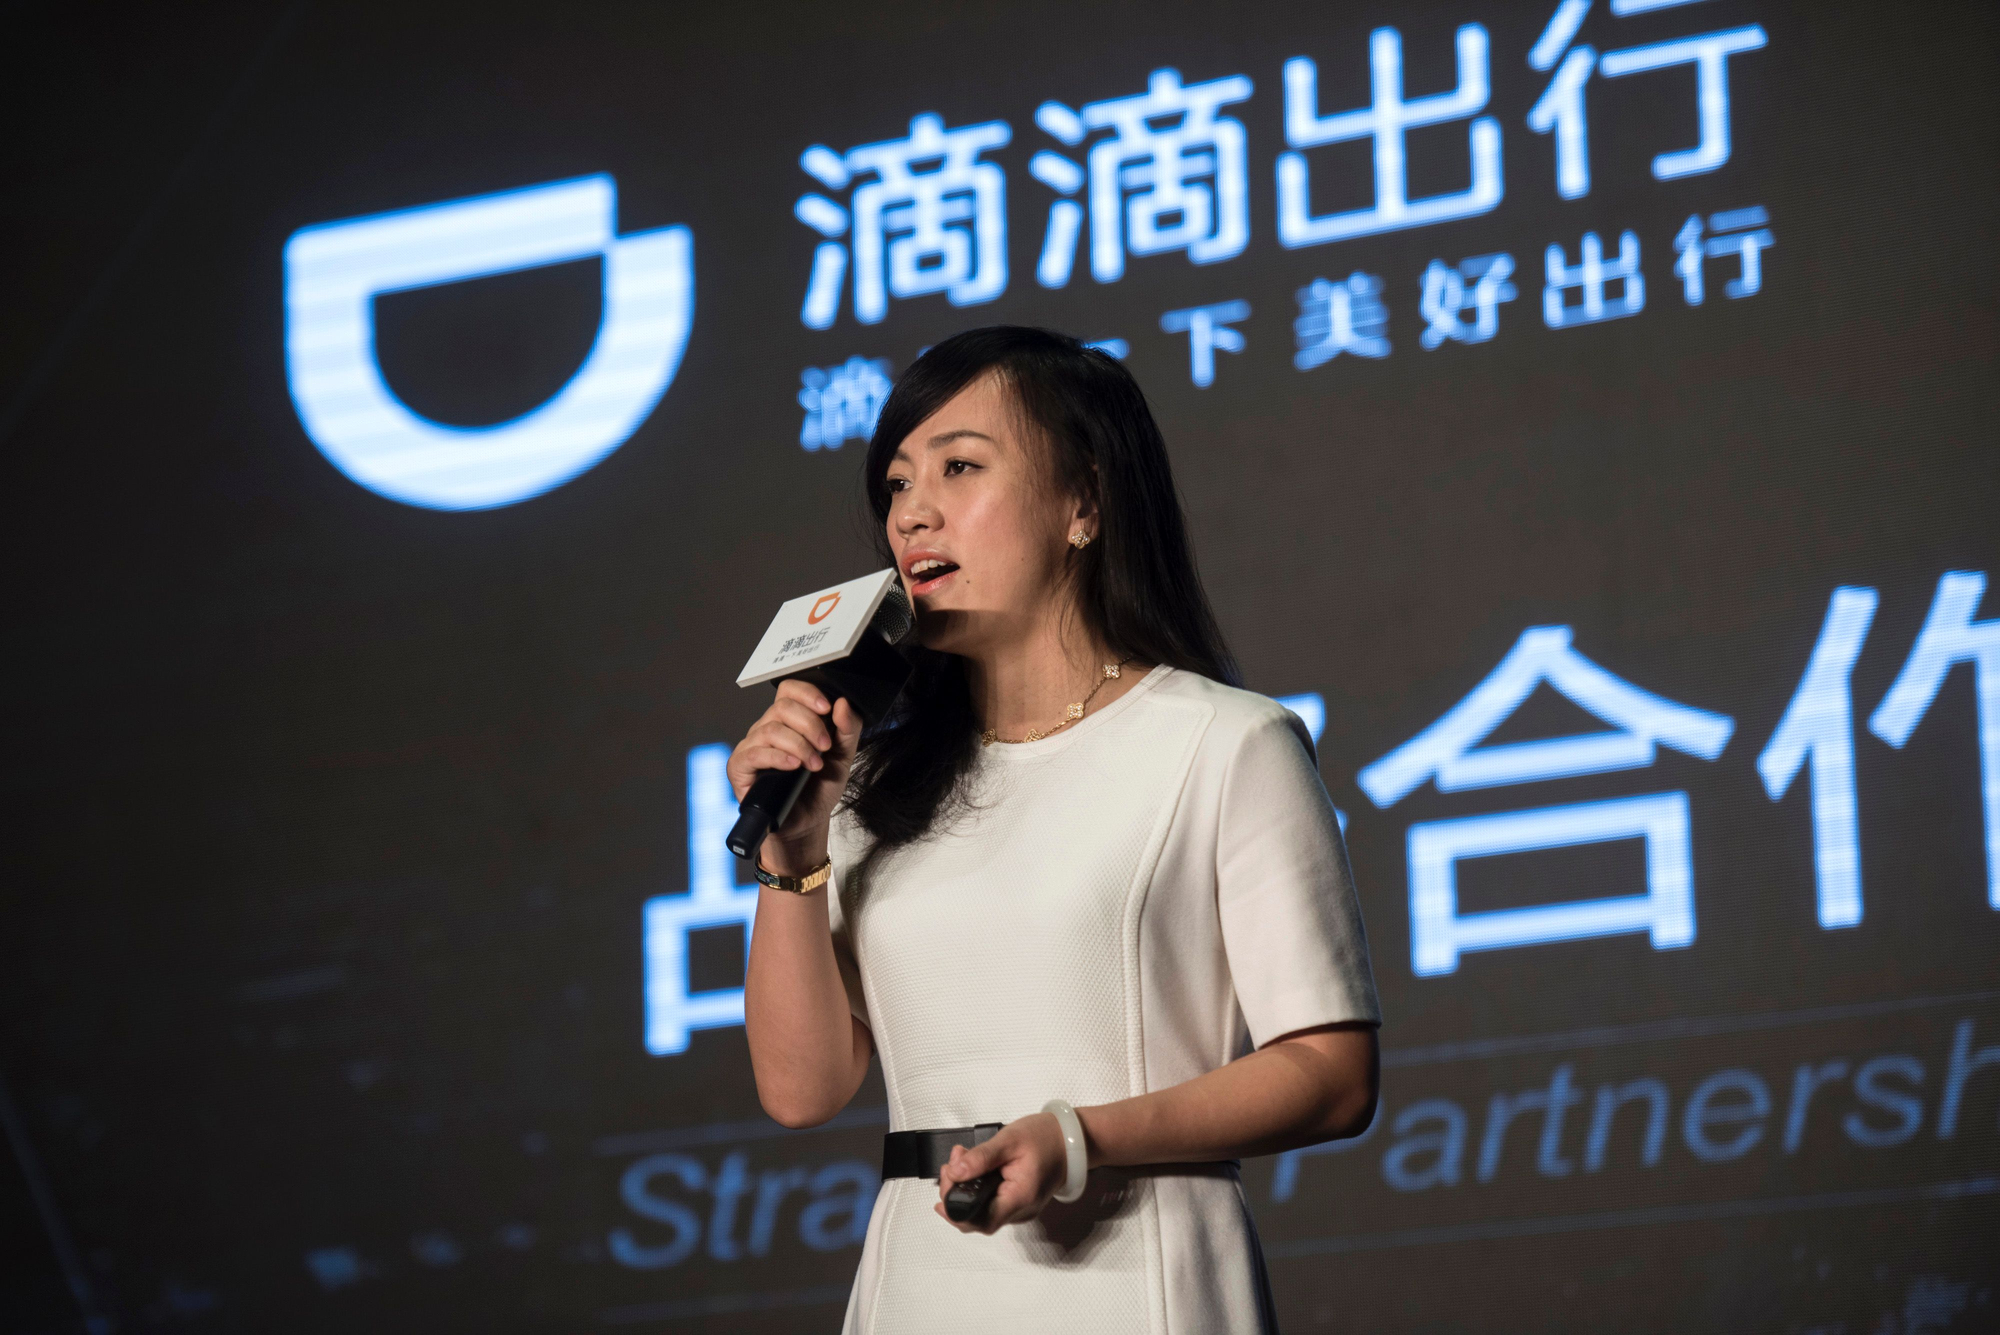 (FILES) This file picture taken on January 26, 2016 shows Jean Liu, president of Didi Chuxing, the number one ride-sharing and taxi-hailing service in China, attending a press event in Beijing. Ride-sharing giant Uber is to merge its China operations with local rival Didi Chuxing, reports said on August 1, ending a ferocious battle for market share in the world's second-largest economy. / AFP PHOTO / FRED DUFOUR